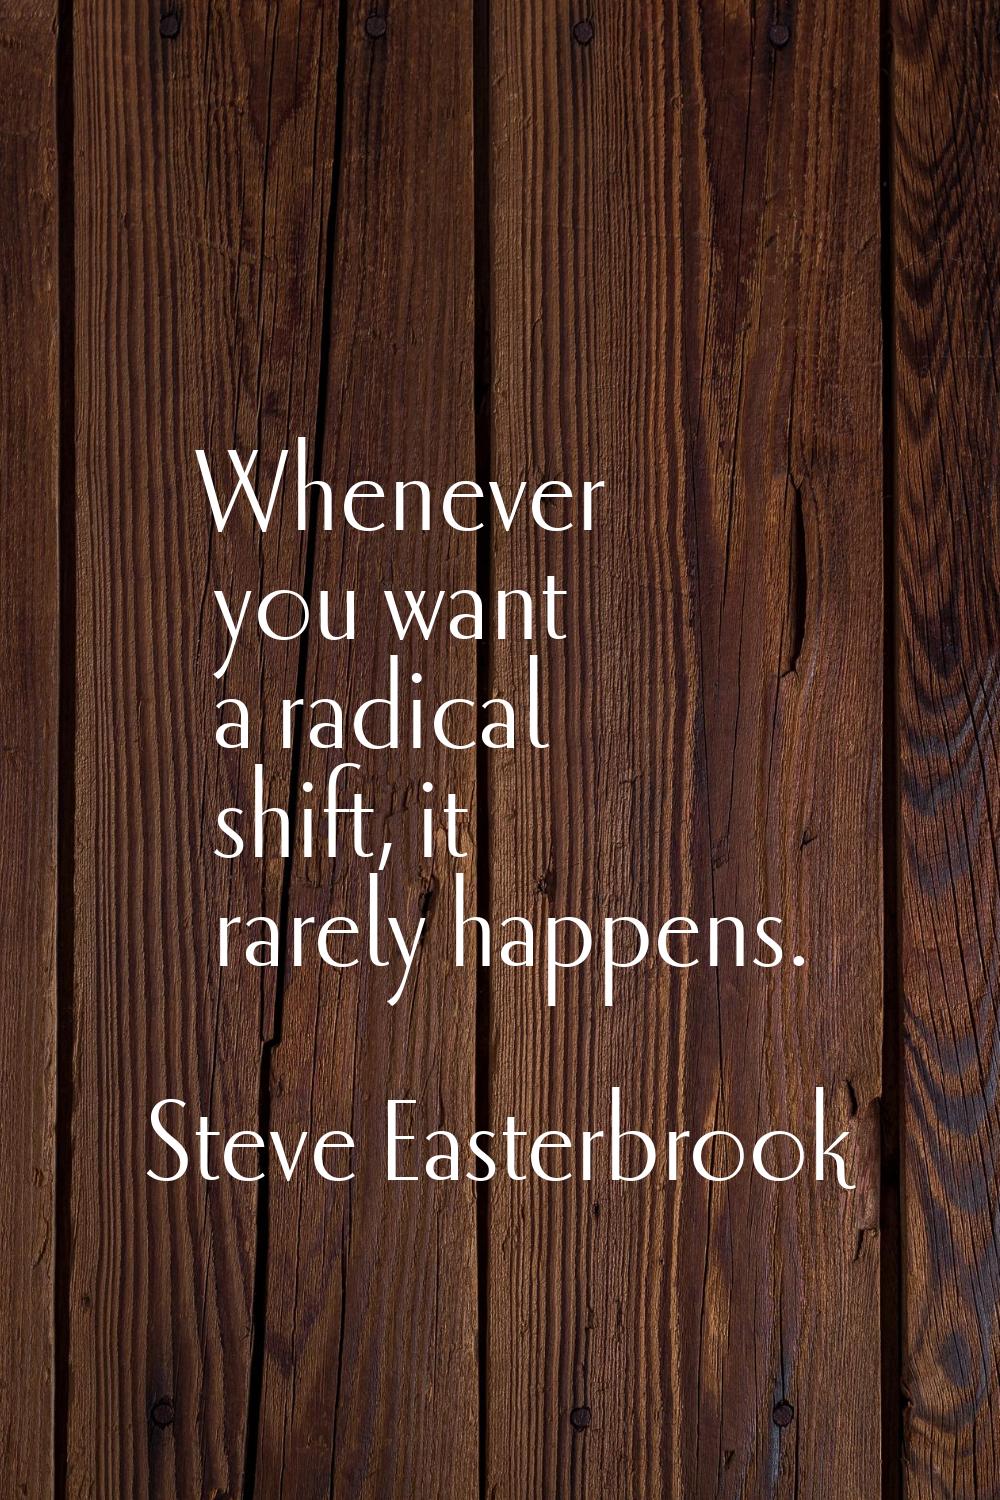 Whenever you want a radical shift, it rarely happens.